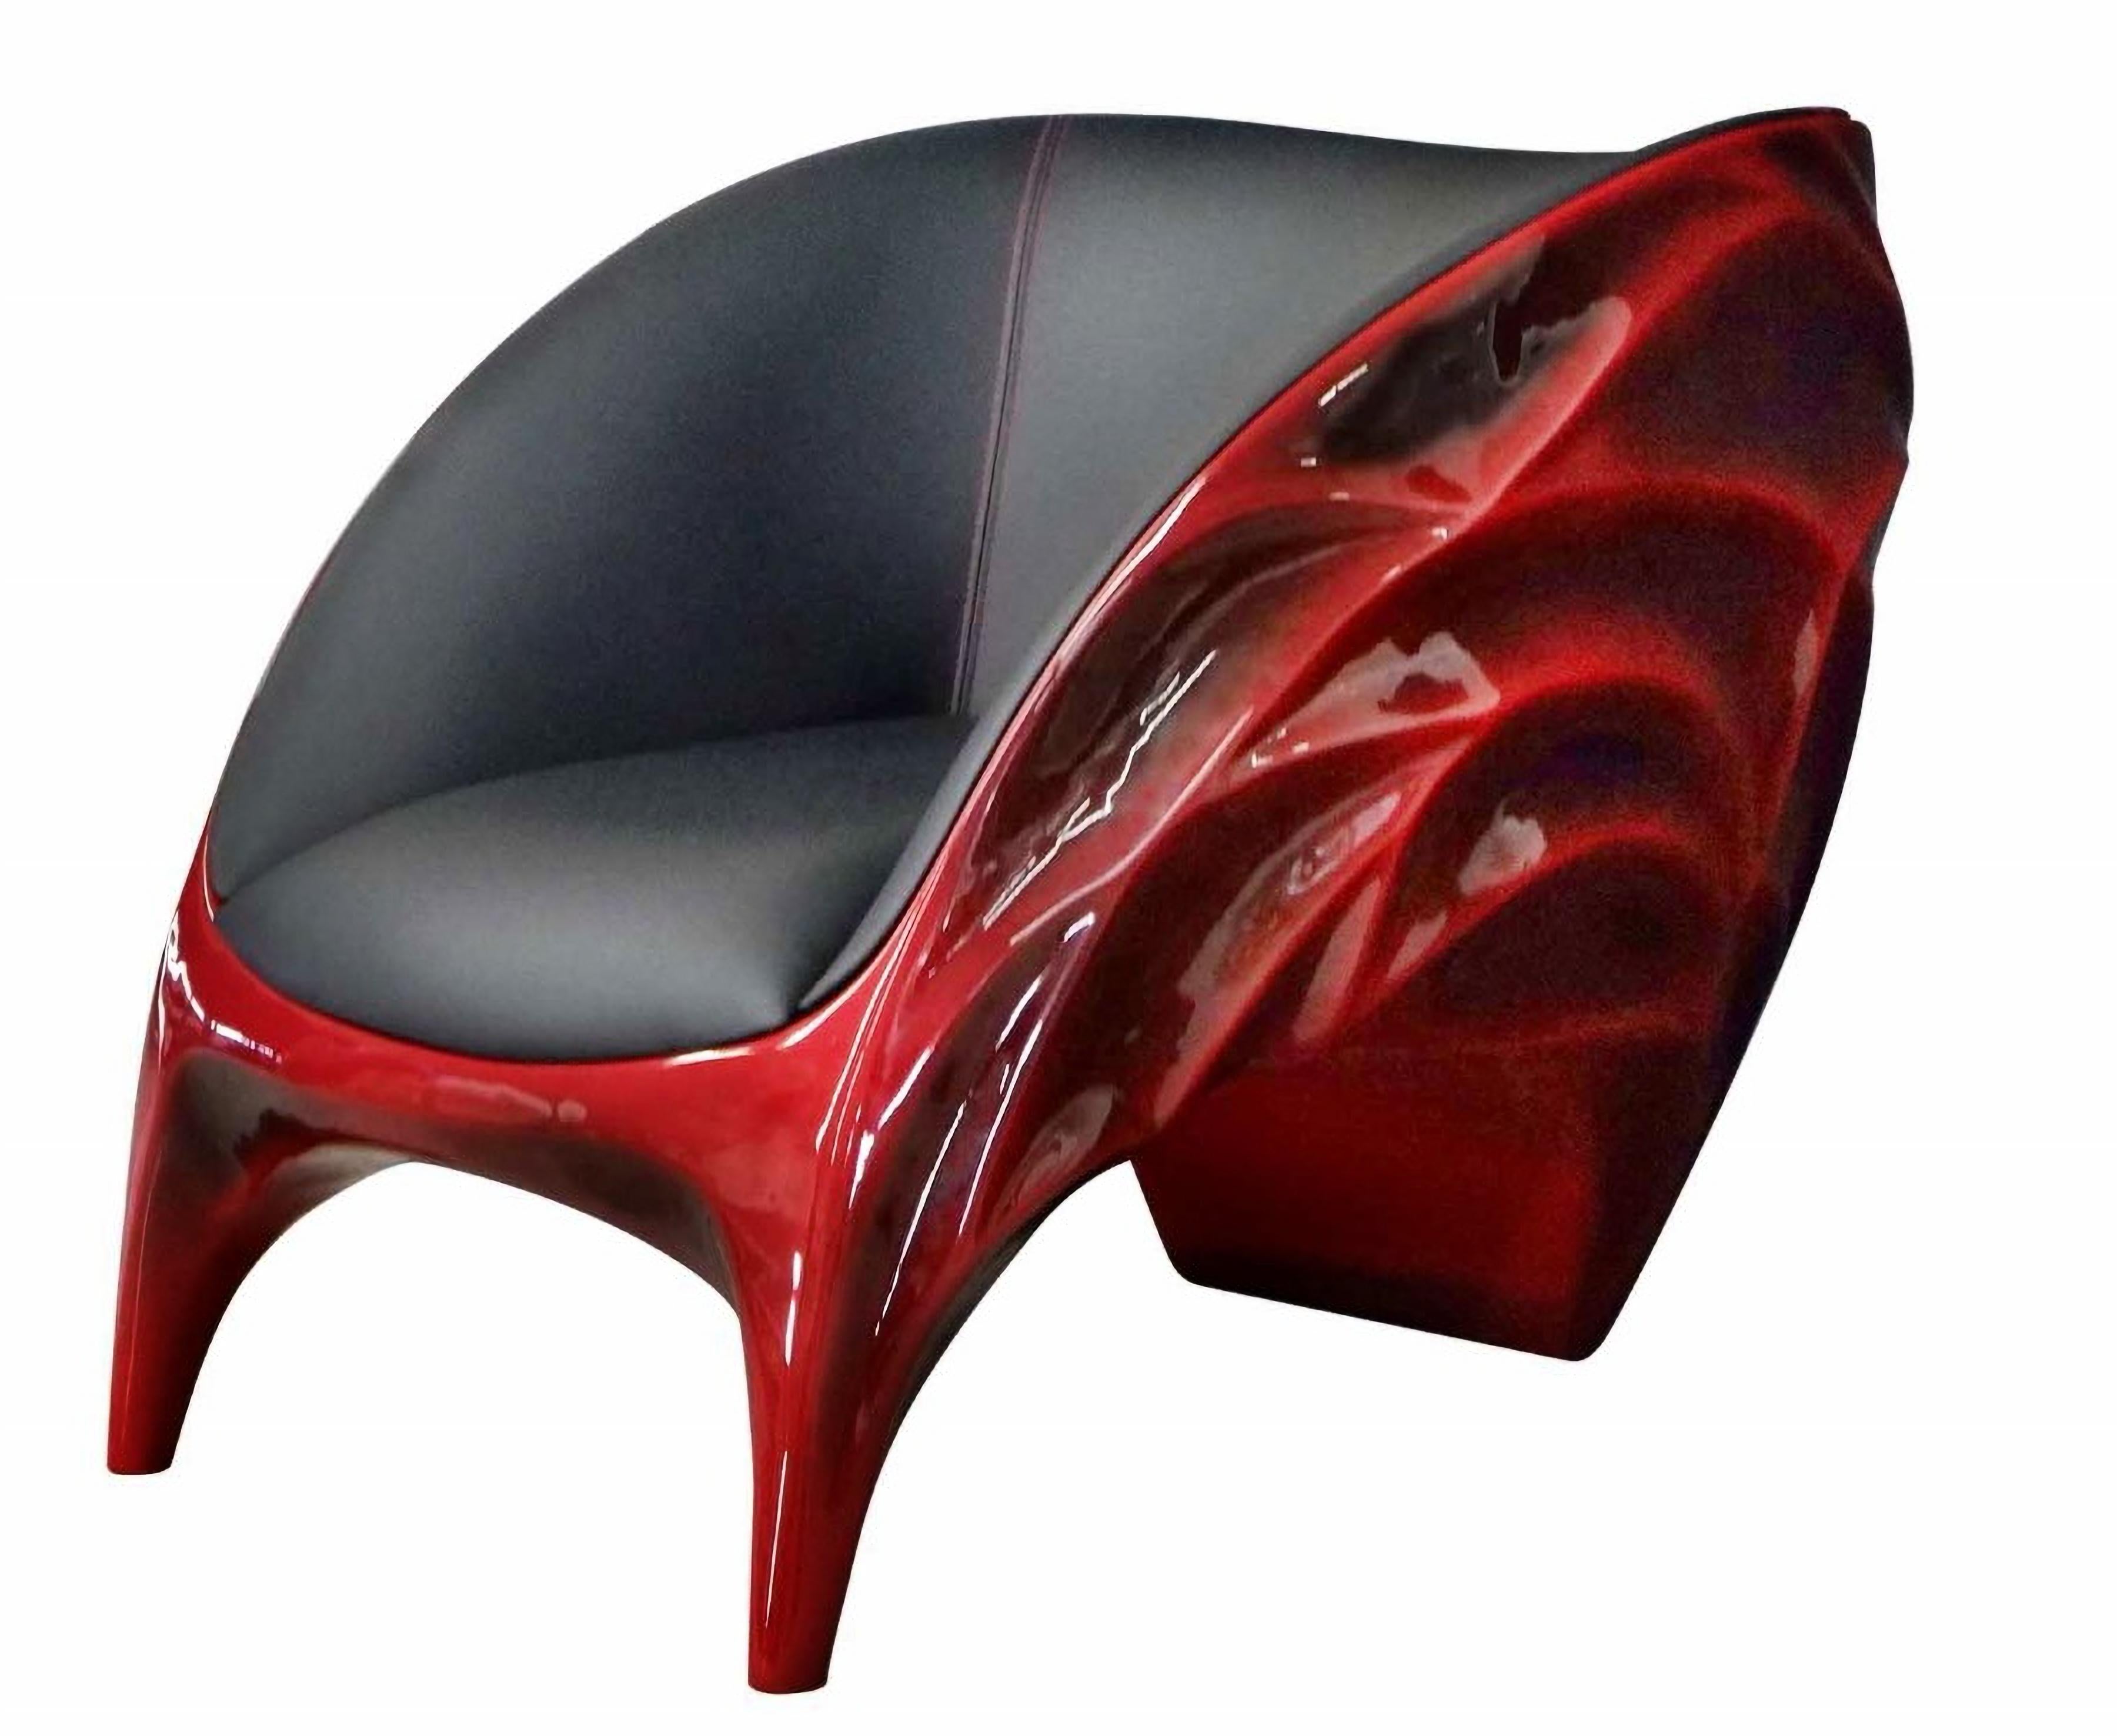 Armchair

General information

Dimensions (cm): 100 x 83 x 73
Dimensions (in): 39.4 x 32.7 x 28.7
Weight (kg): 24
Weight (lbs): 52.9

Materials and Colors

Structure: Resin reinforced with fiberglass, lacquered in marsala color with aged high gloss